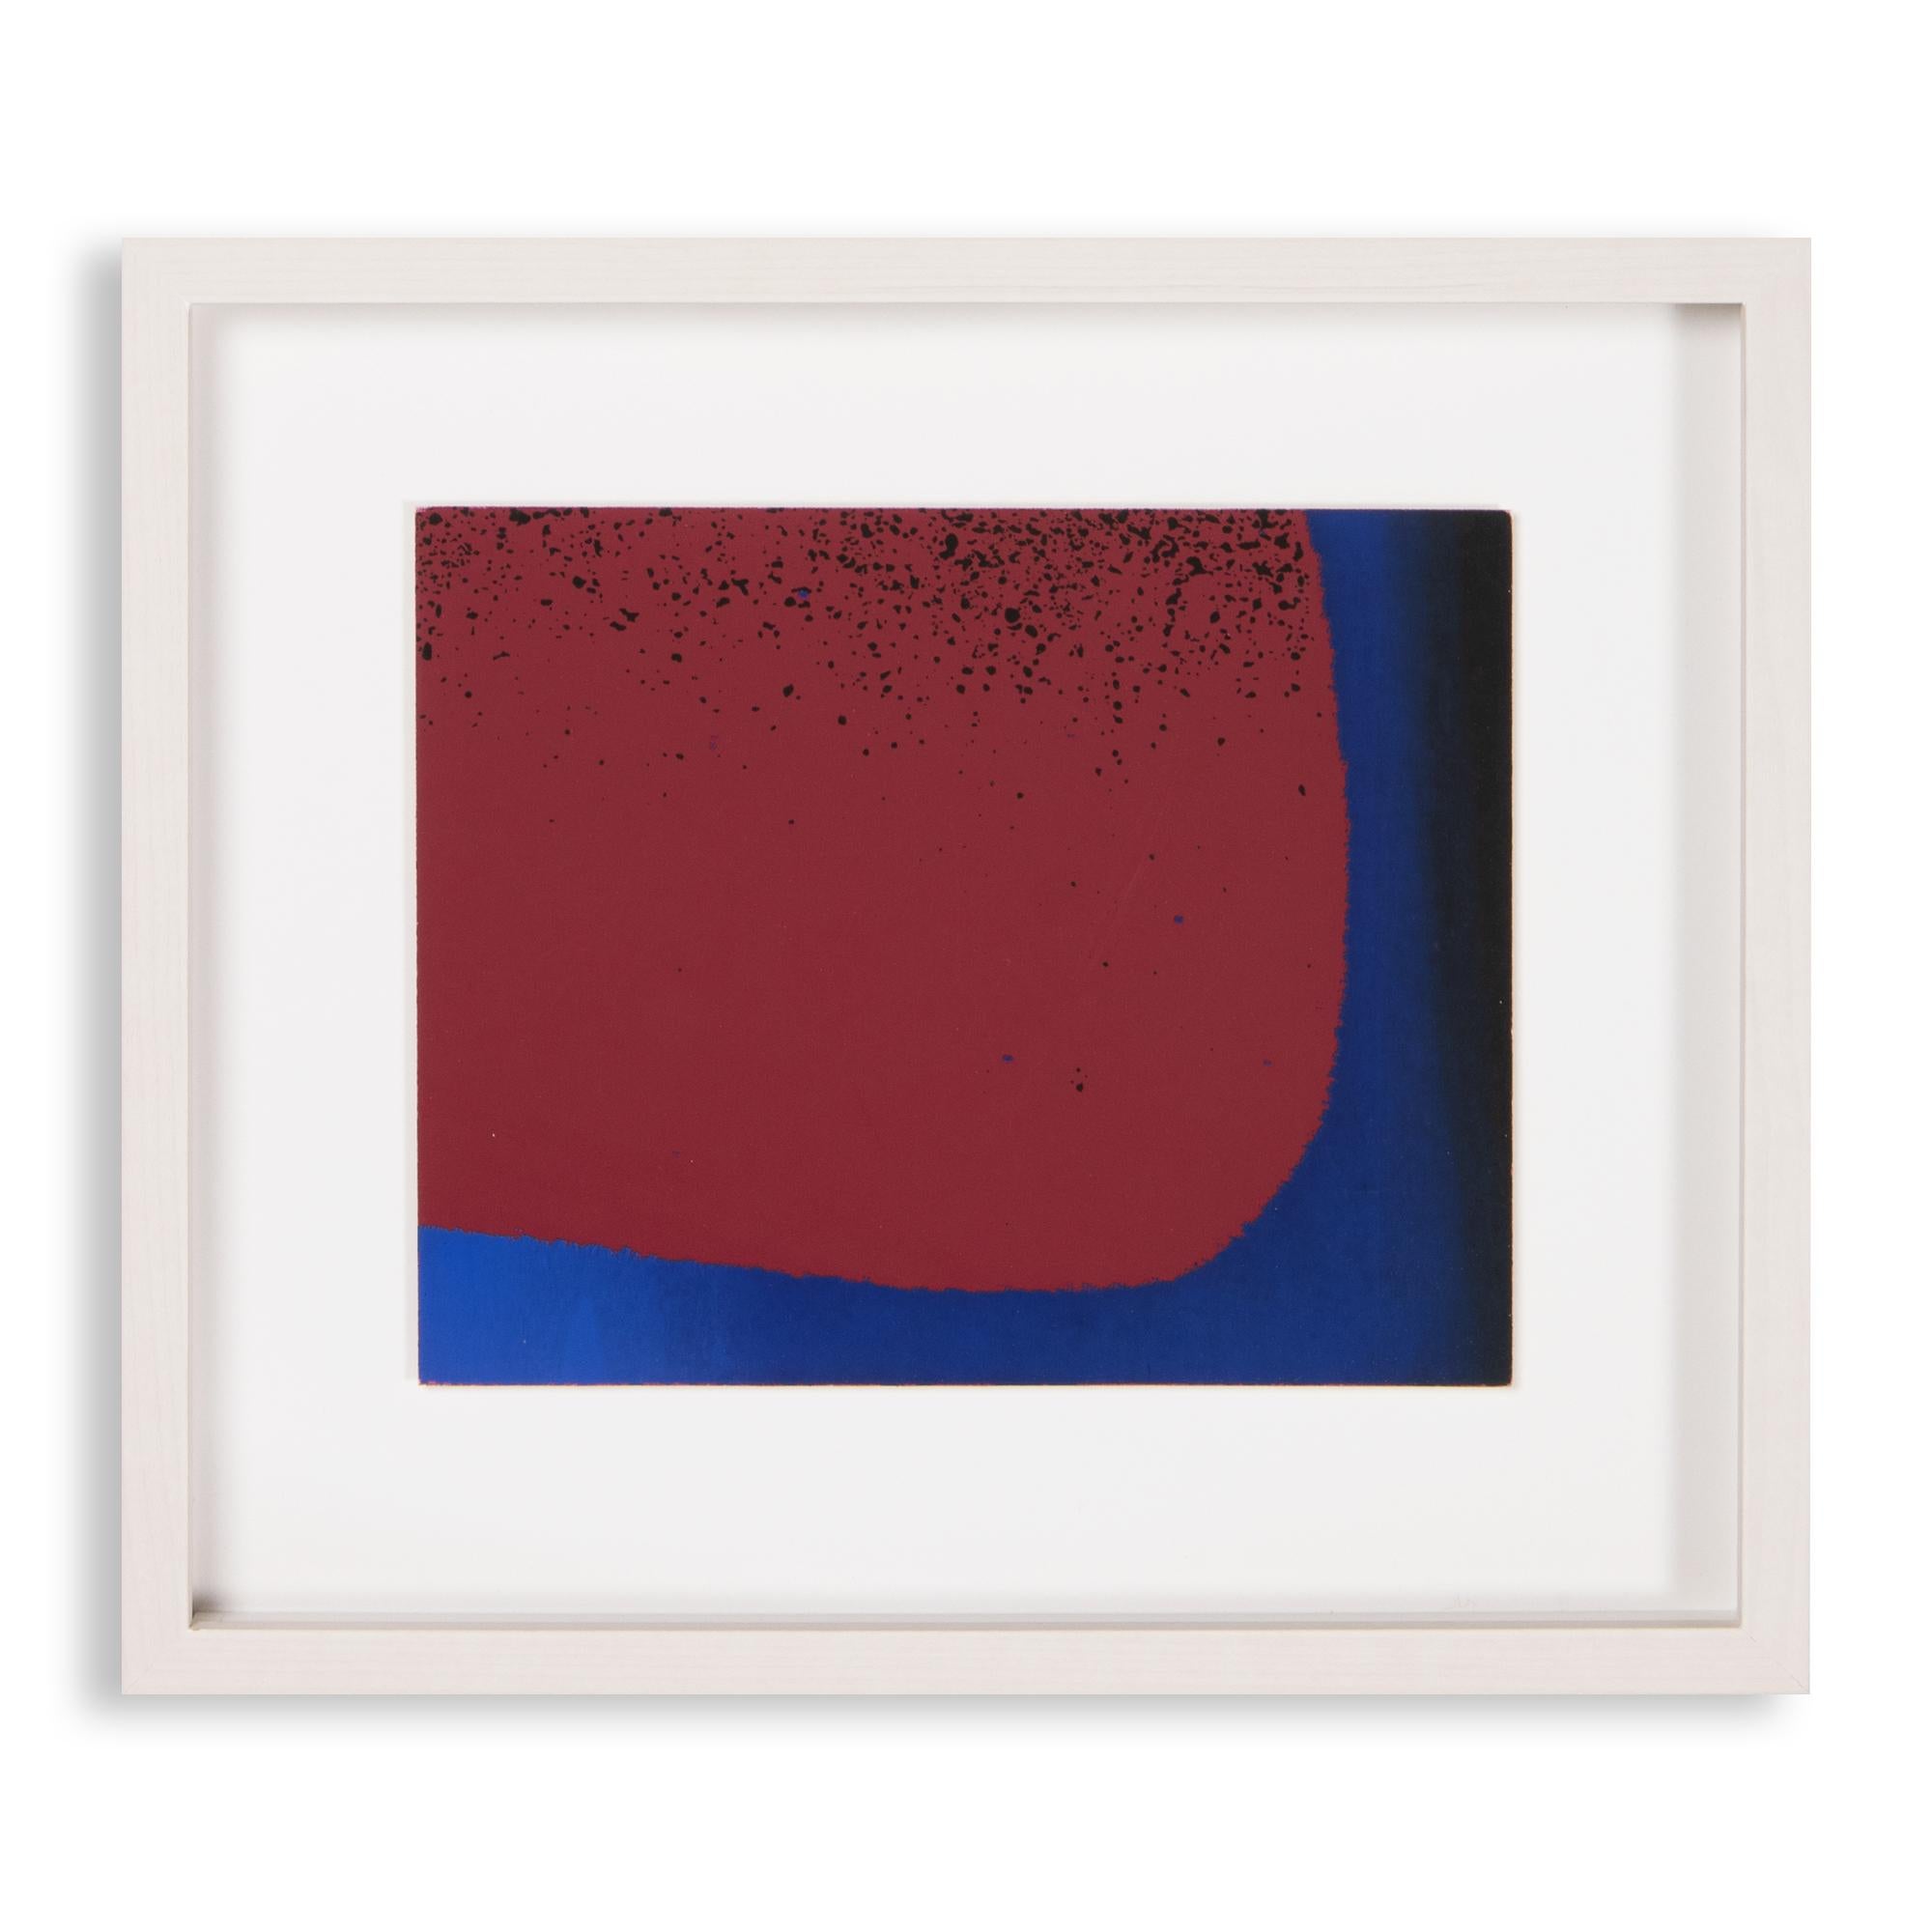 Rupprecht Geiger, Bluish Red and Blue-Black - Abstract Art, Signed Print